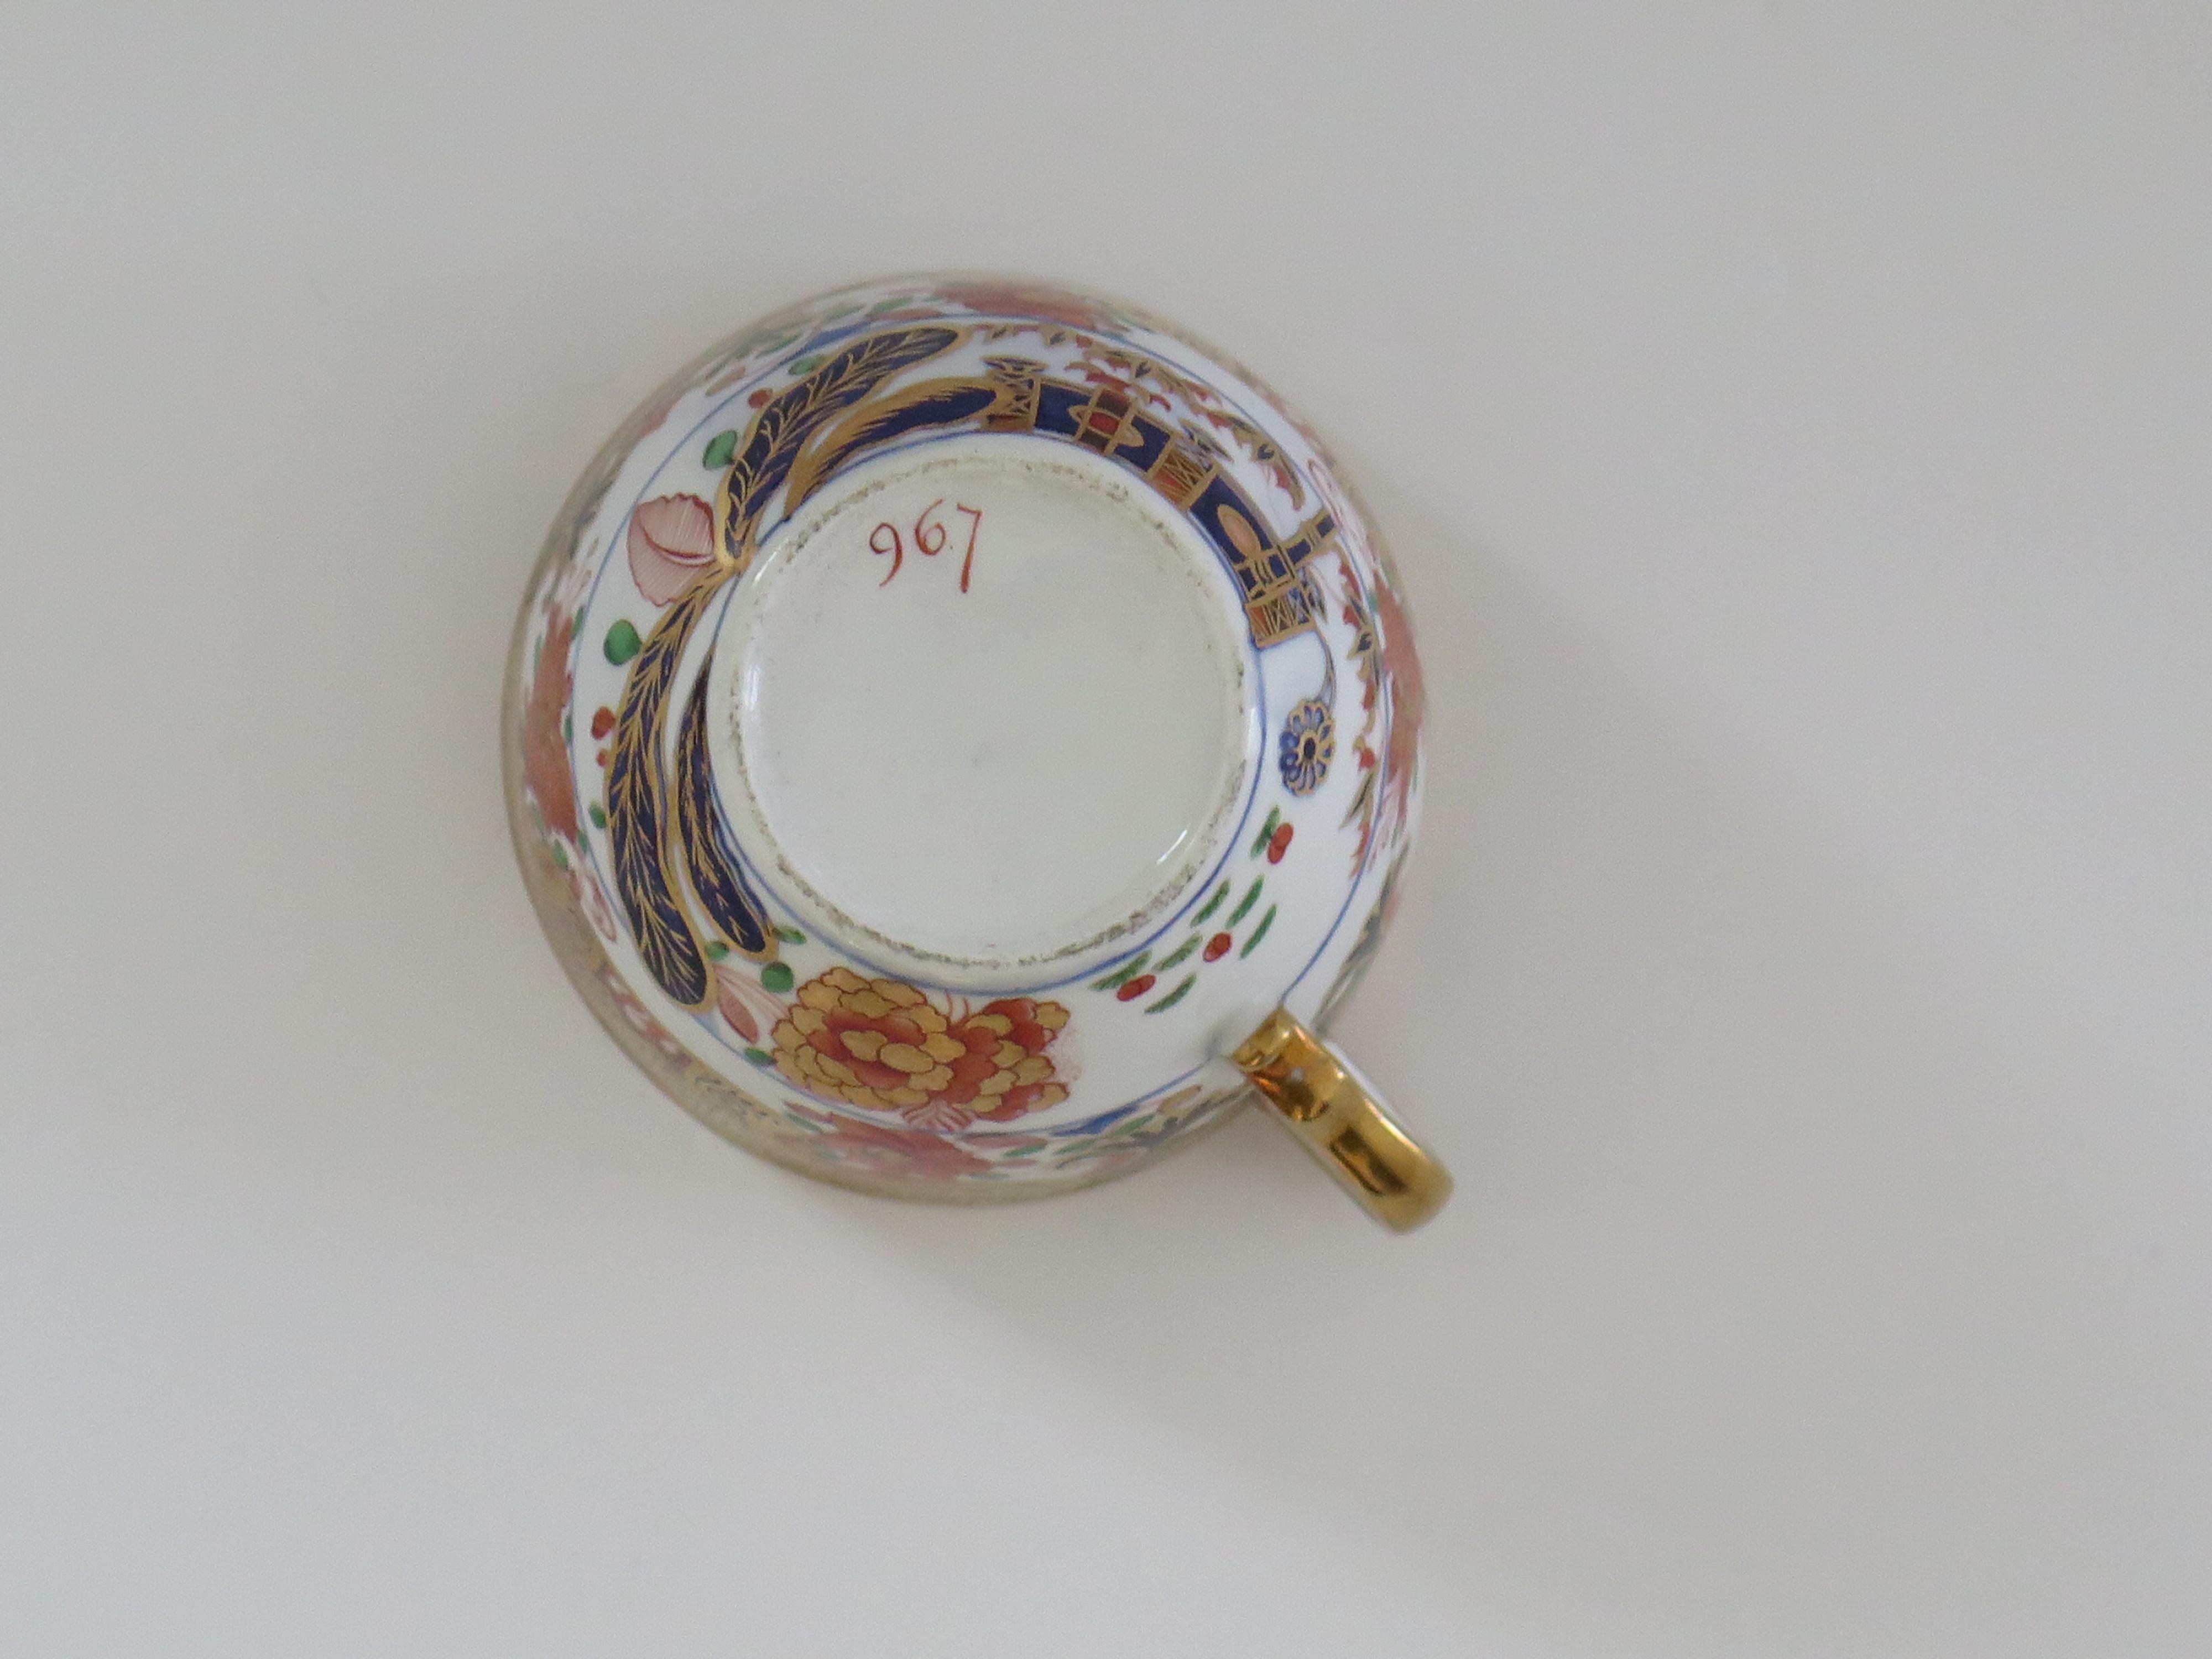 Spode Porcelain Tea Cup in Hand Painted & Gilded Pattern 967, circa 1810 For Sale 7